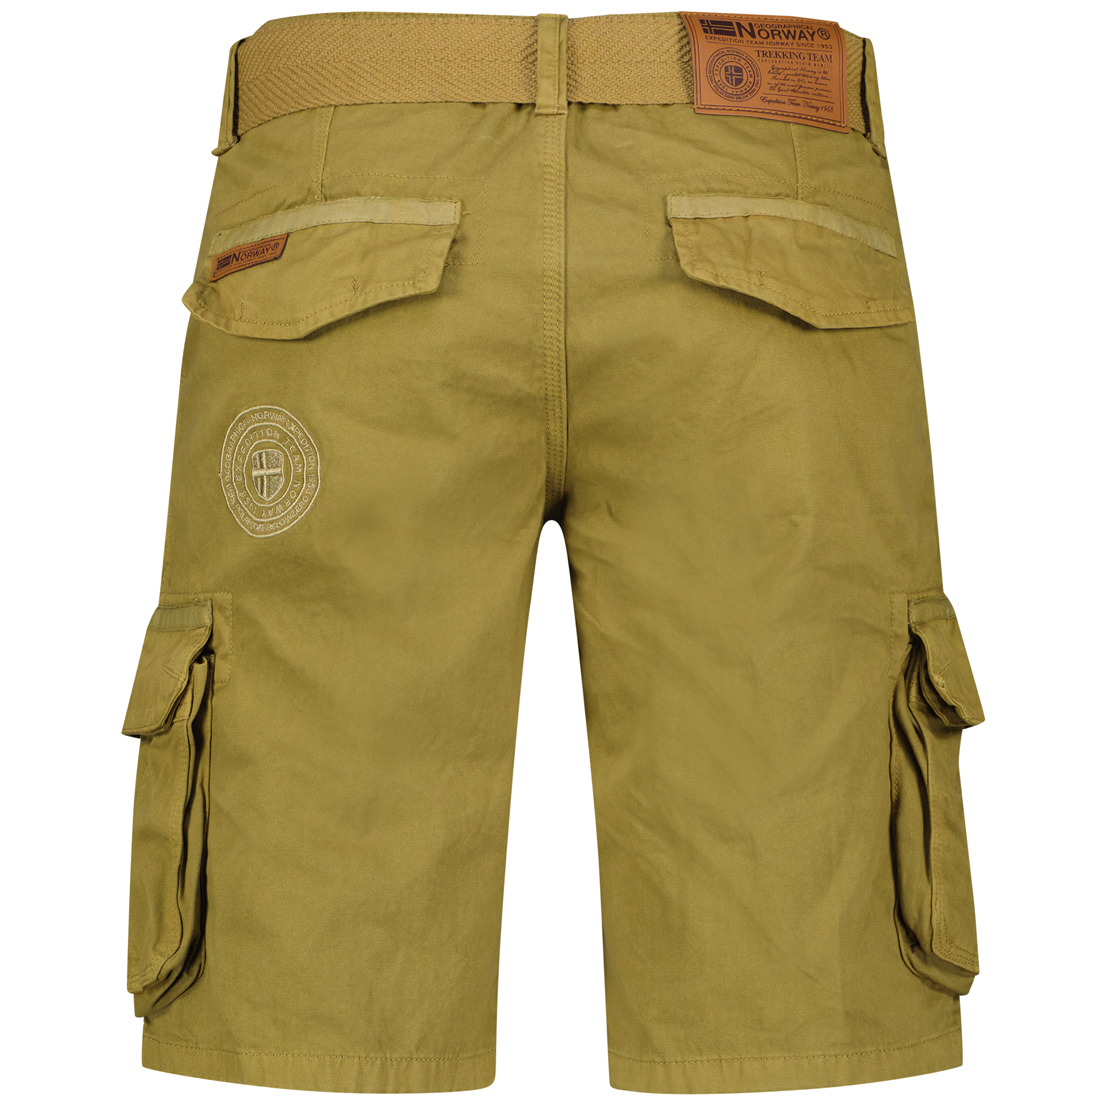 Cotton Shorts with Visible Logo and Multiple Pockets